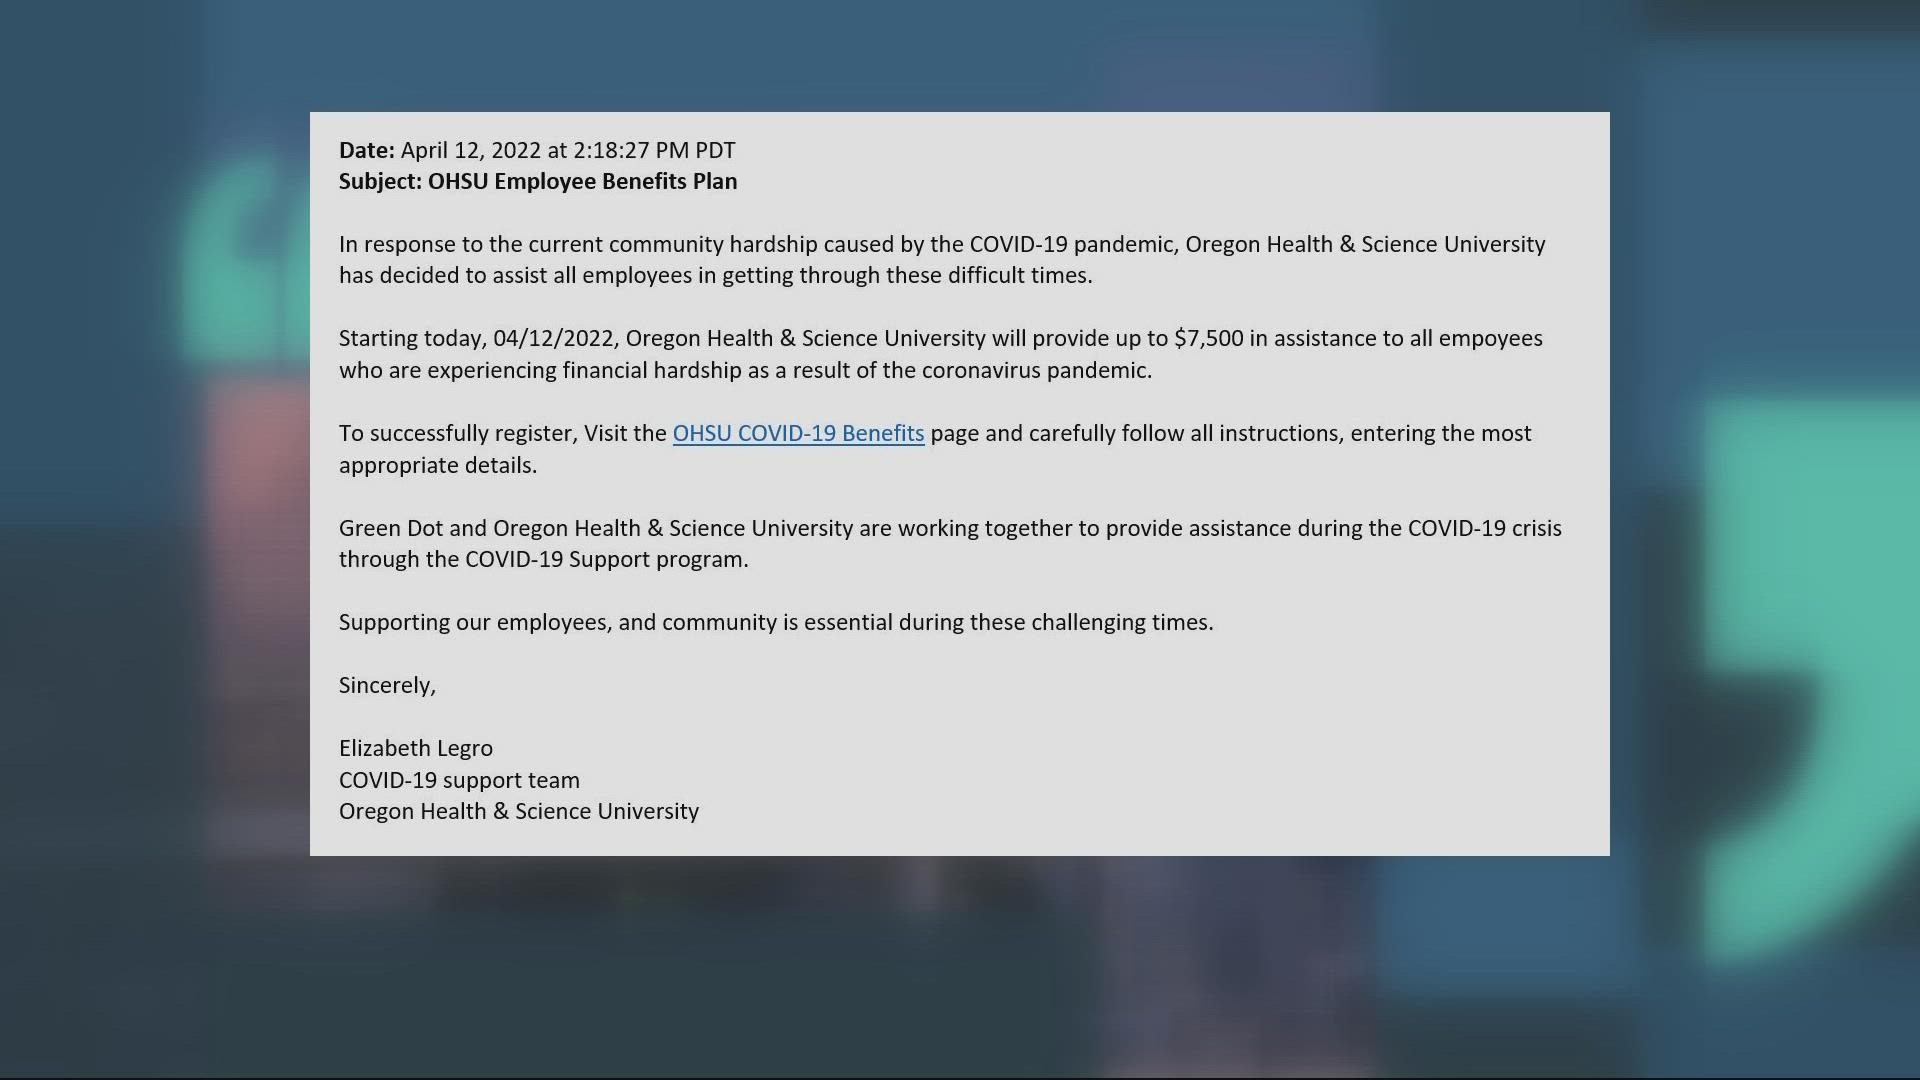 In a statement, OHSU said it made a mistake by using the same language from a real phishing threat to test whether employees would click a link.